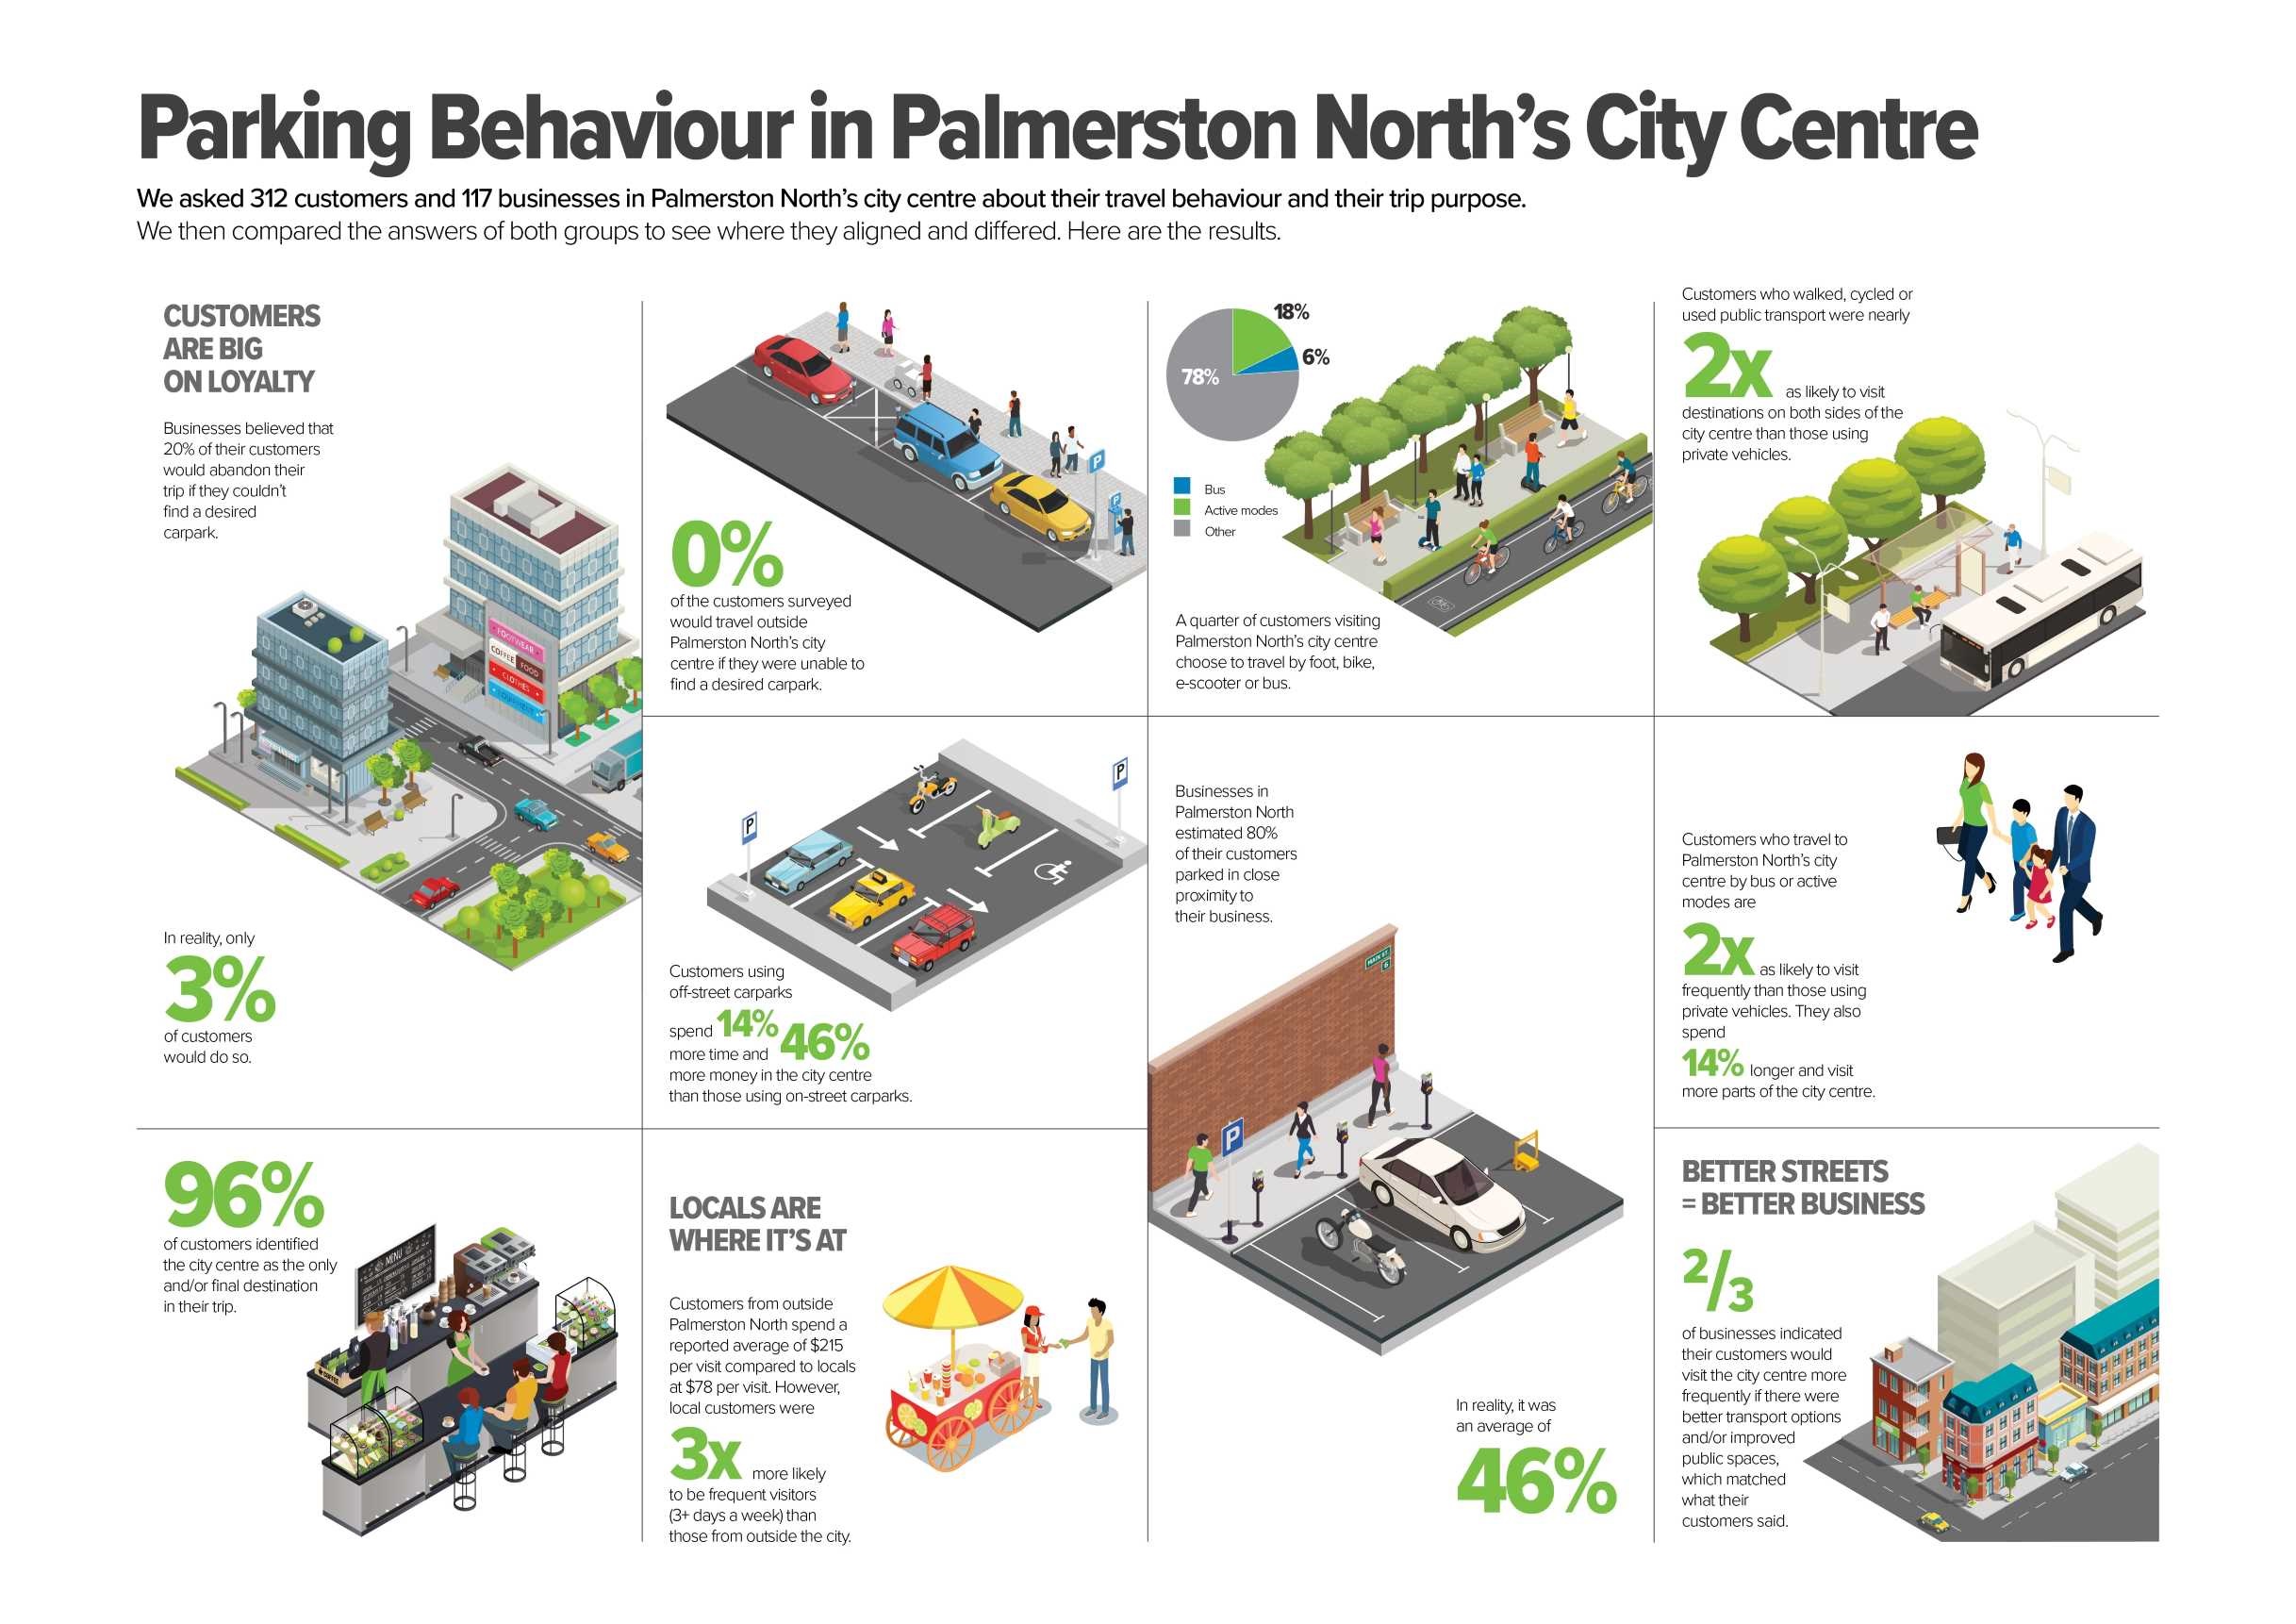 Statistical information about parking behaviour in Palmerston North city centre.